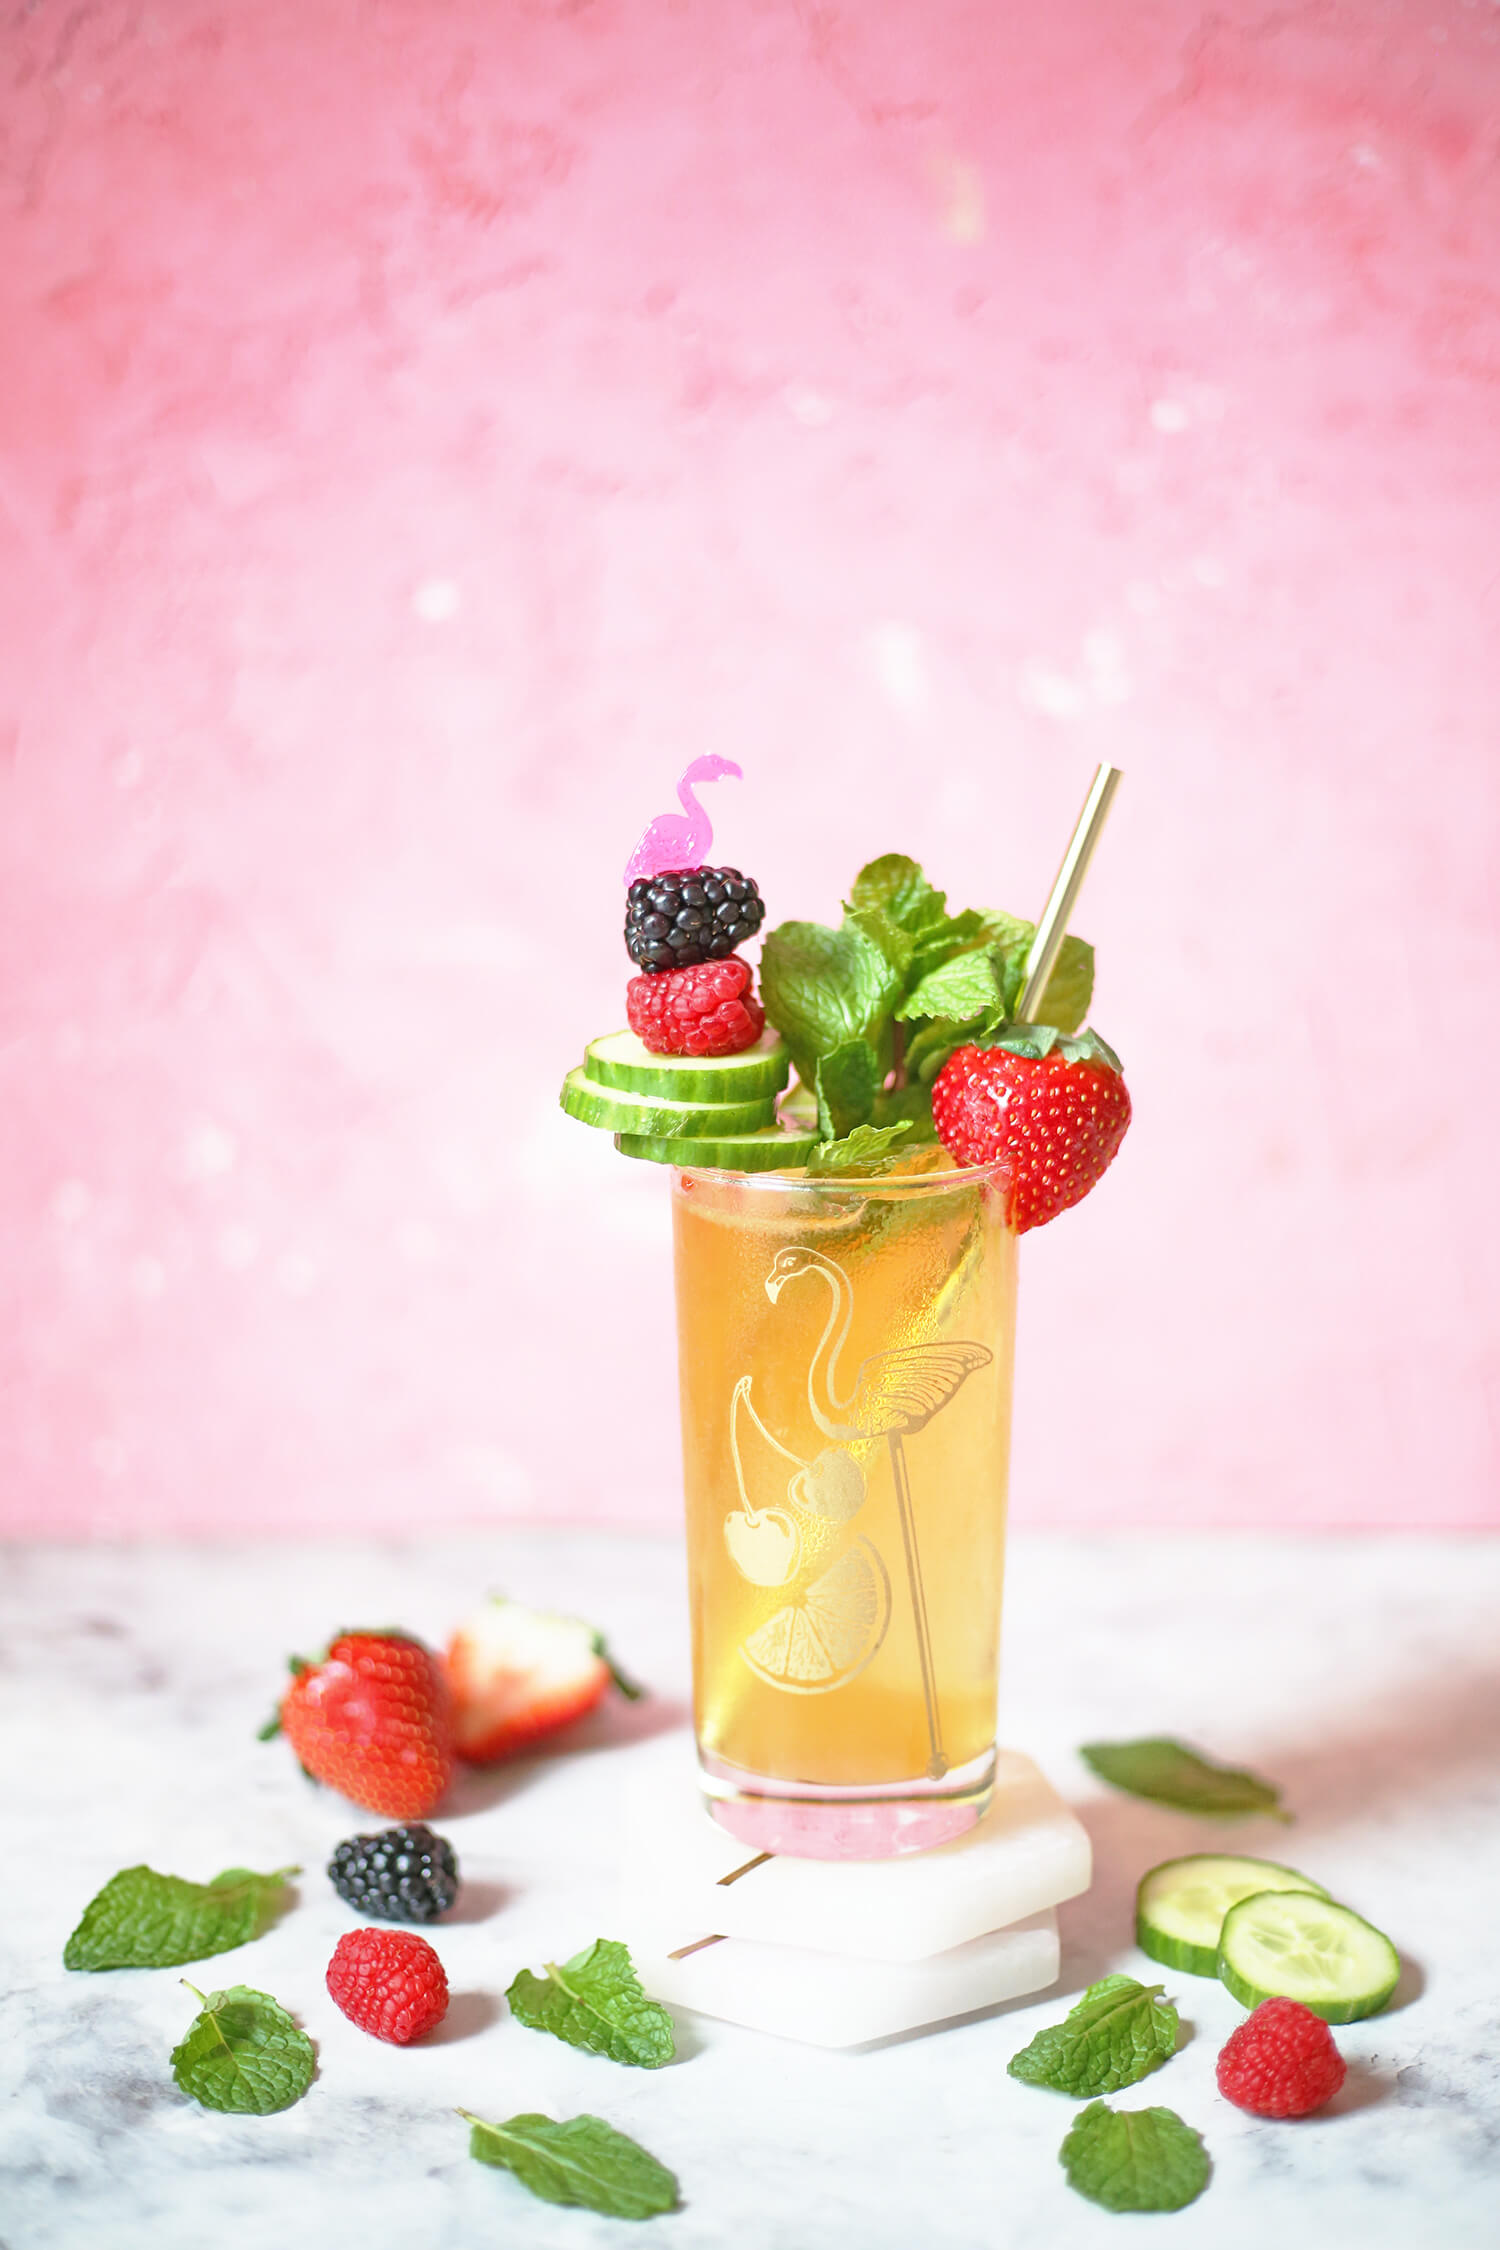 Winter Pimm's Cup 